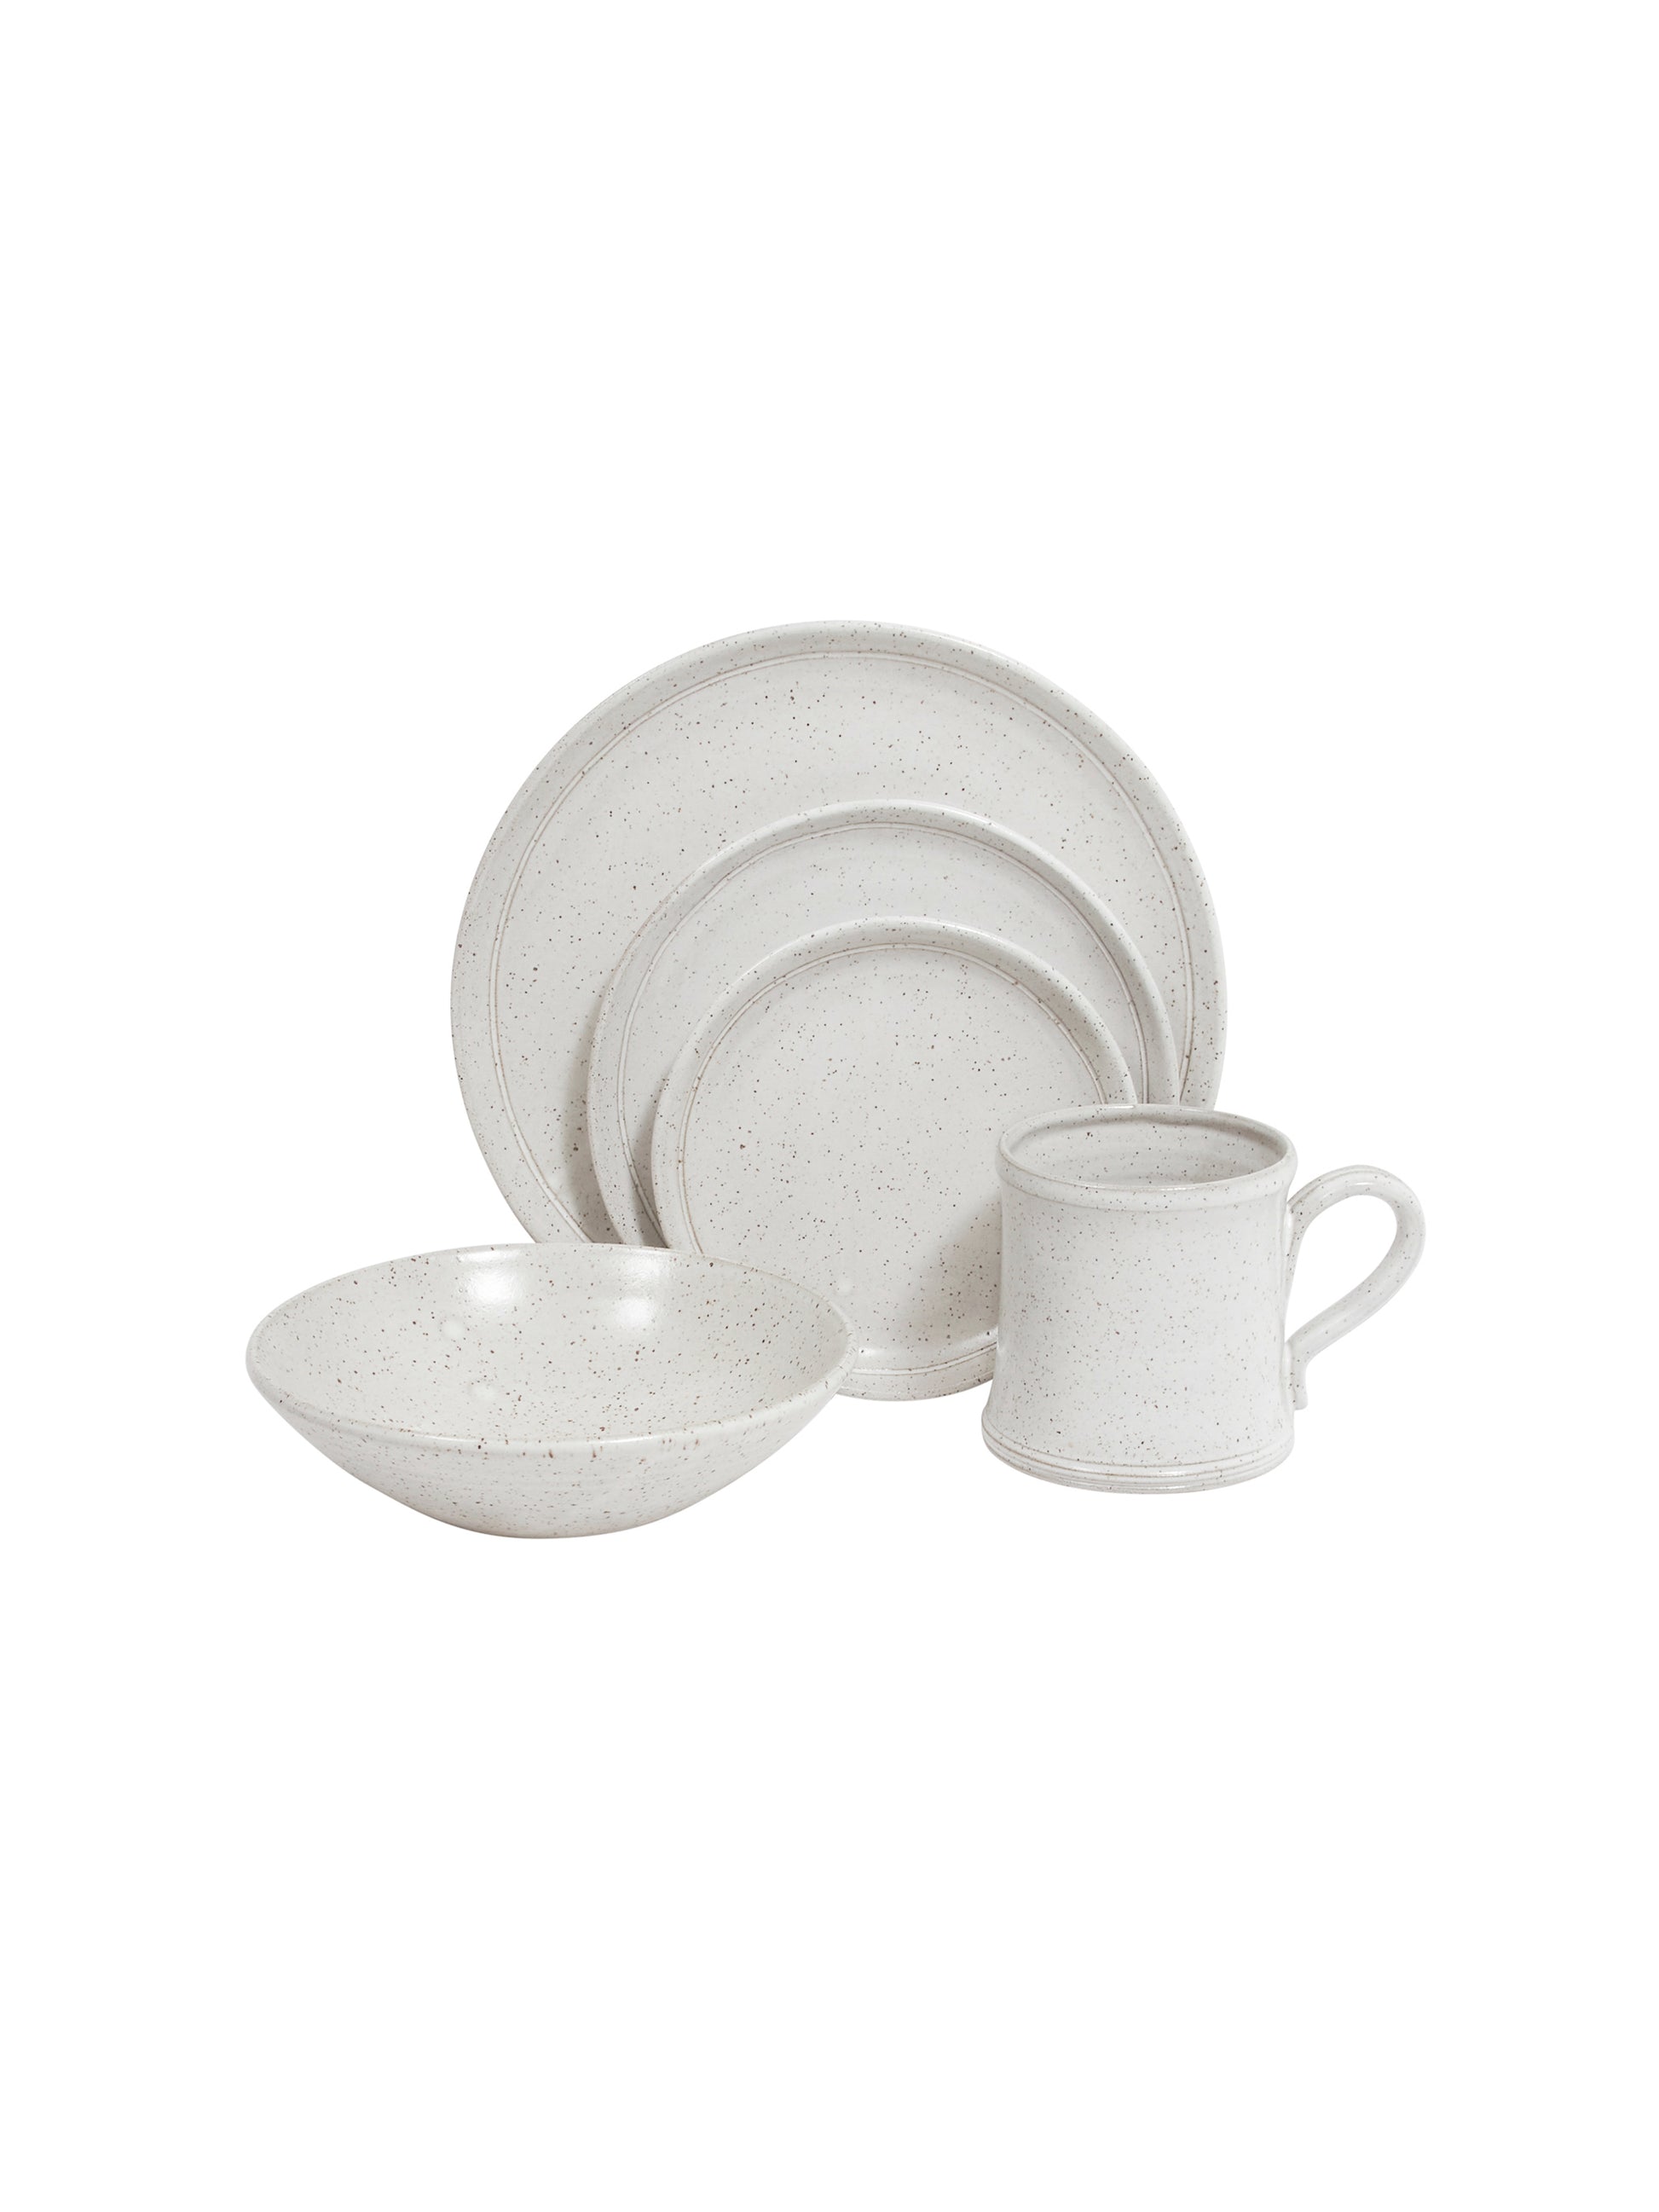 McQueen Pottery Speckled Dinnerware 5 Piece Place Setting Weston Table